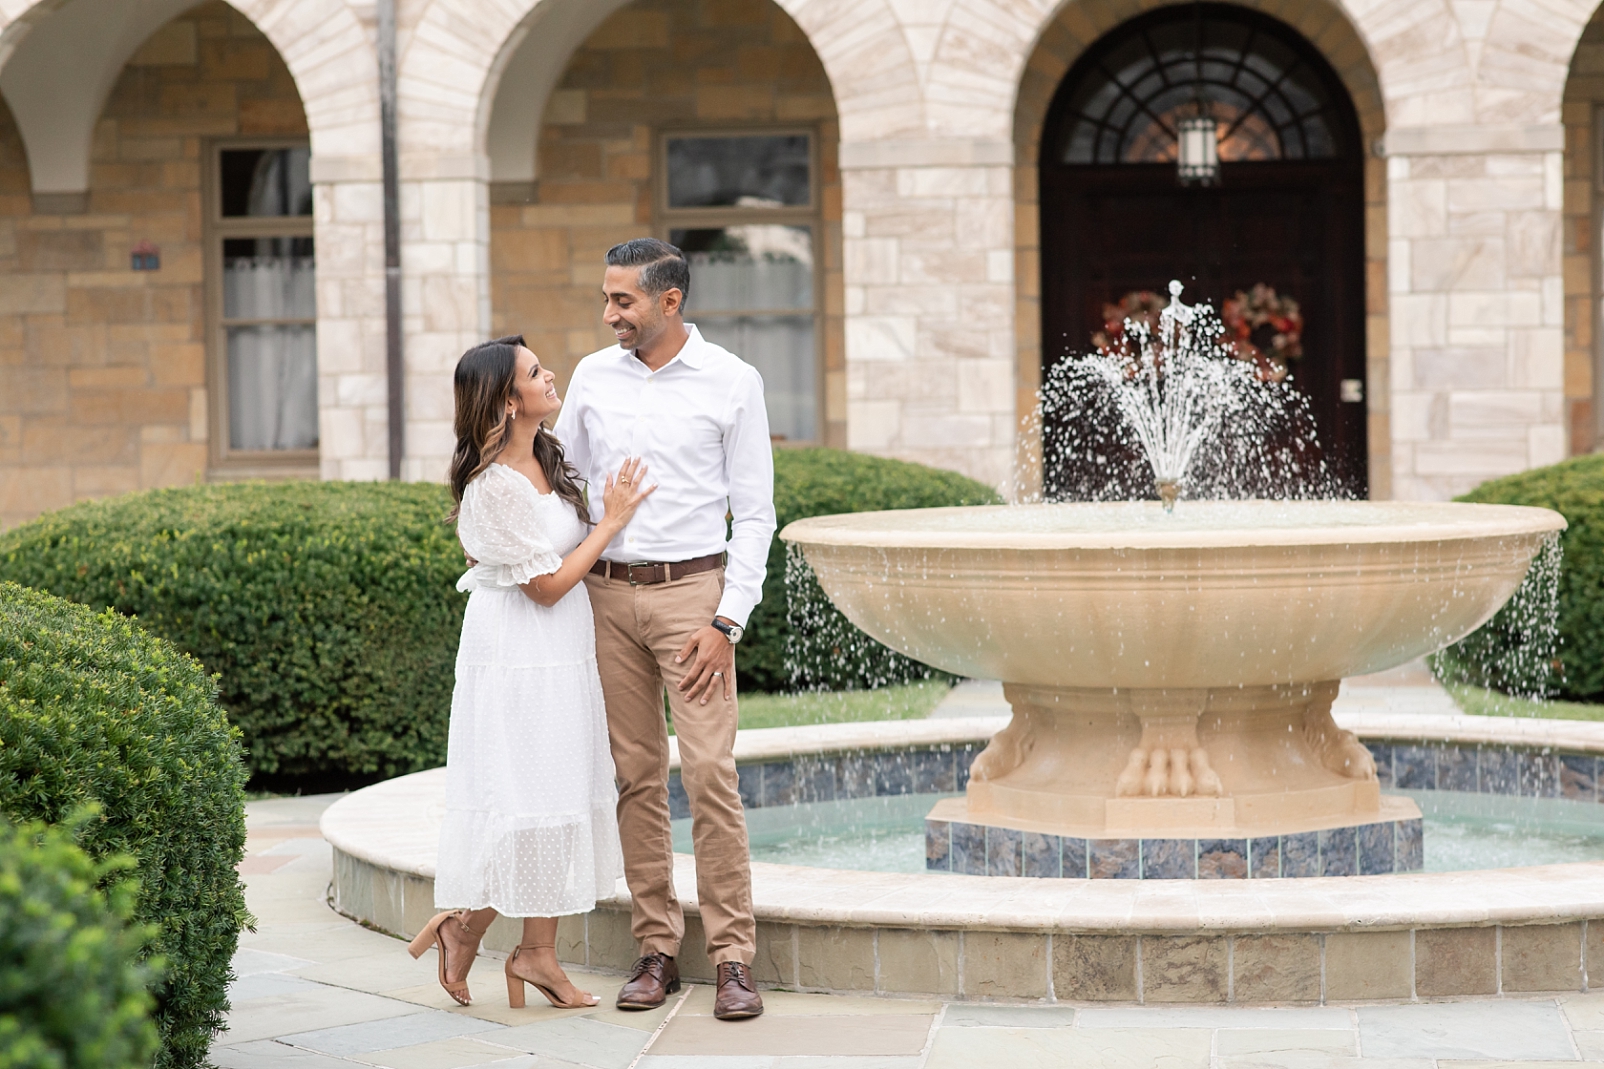 a wife and husband standing together in front of a fountain